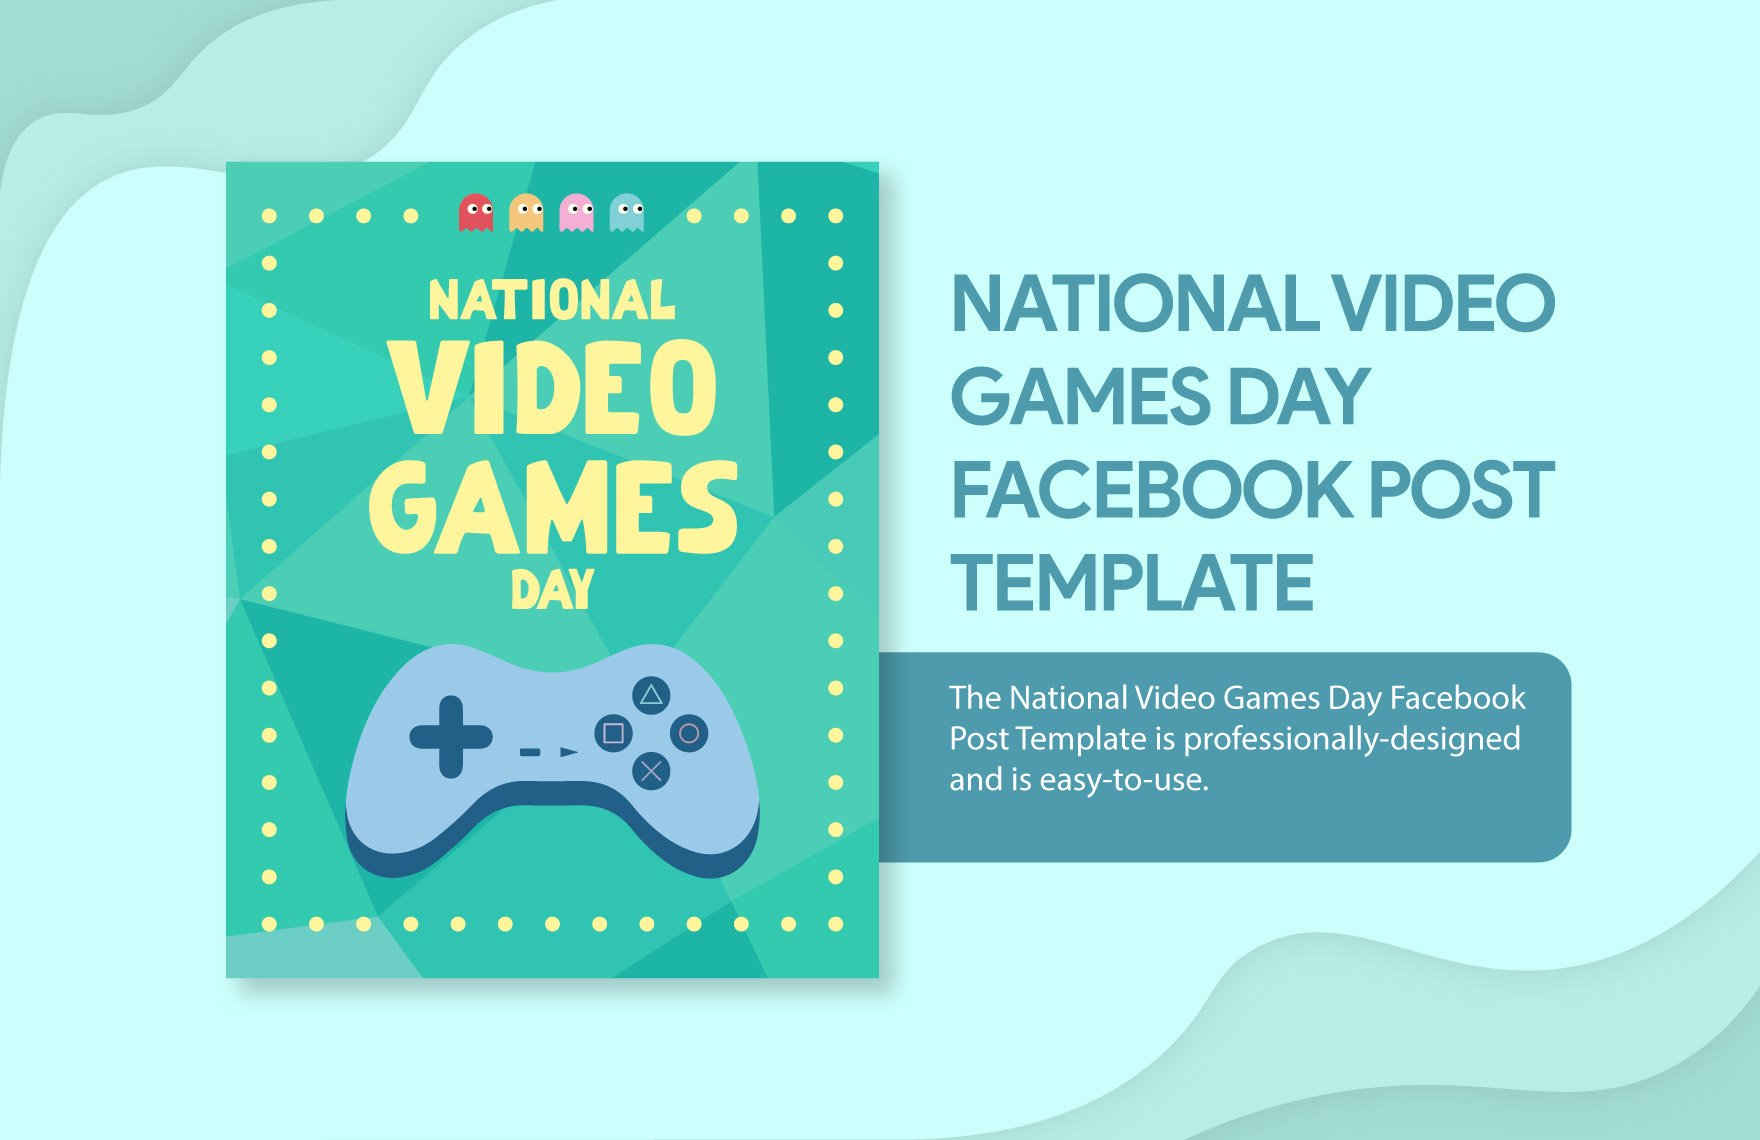 National Video Games Day Facebook Post Template